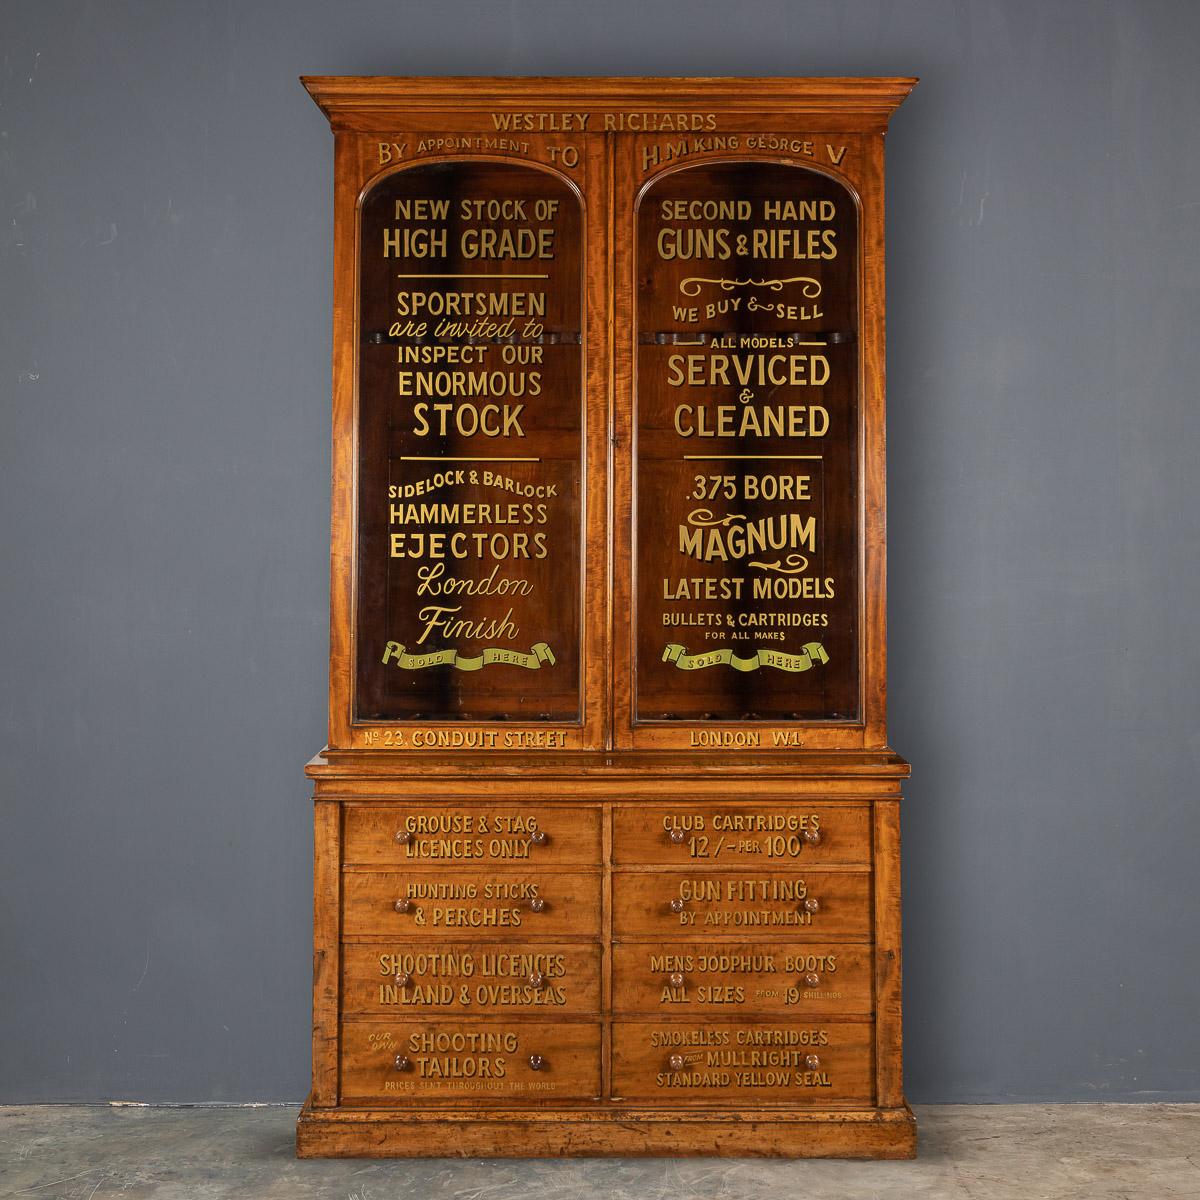 Antique 19th century English walnut gun cabinets, with working locks and keys. Beautiful pieces of period furniture, later painted with various shooting related advertising and compartments for various cartridges and shooting accessories, a very